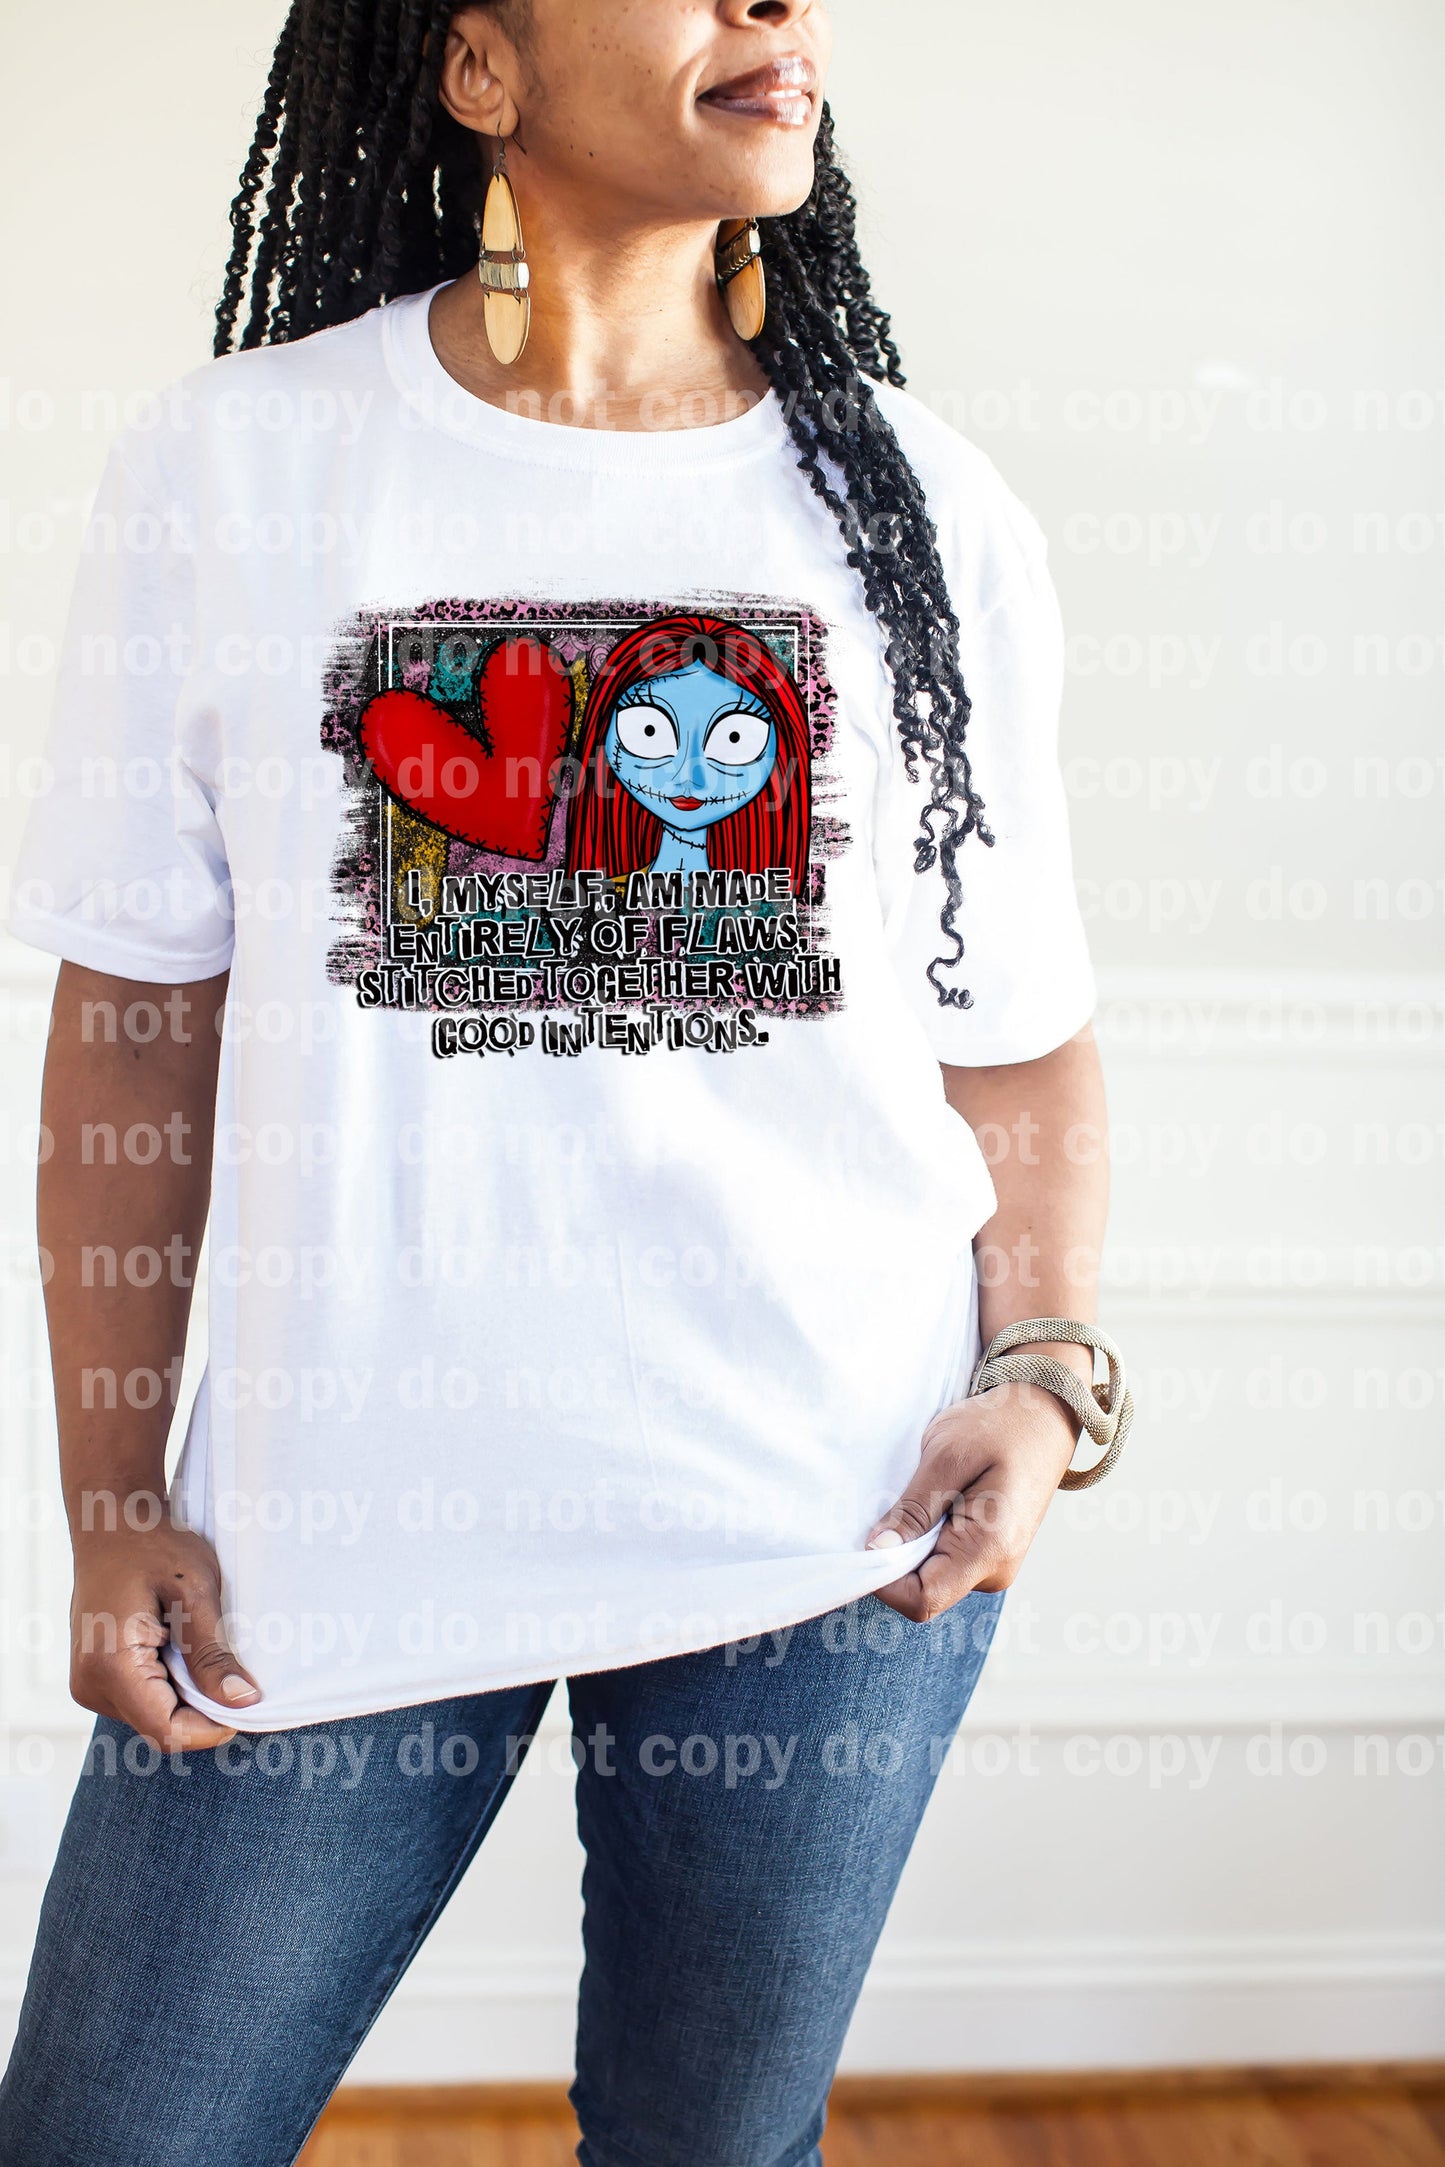 Stitched Together With Good Intentions Distressed Dream Print or Sublimation Print